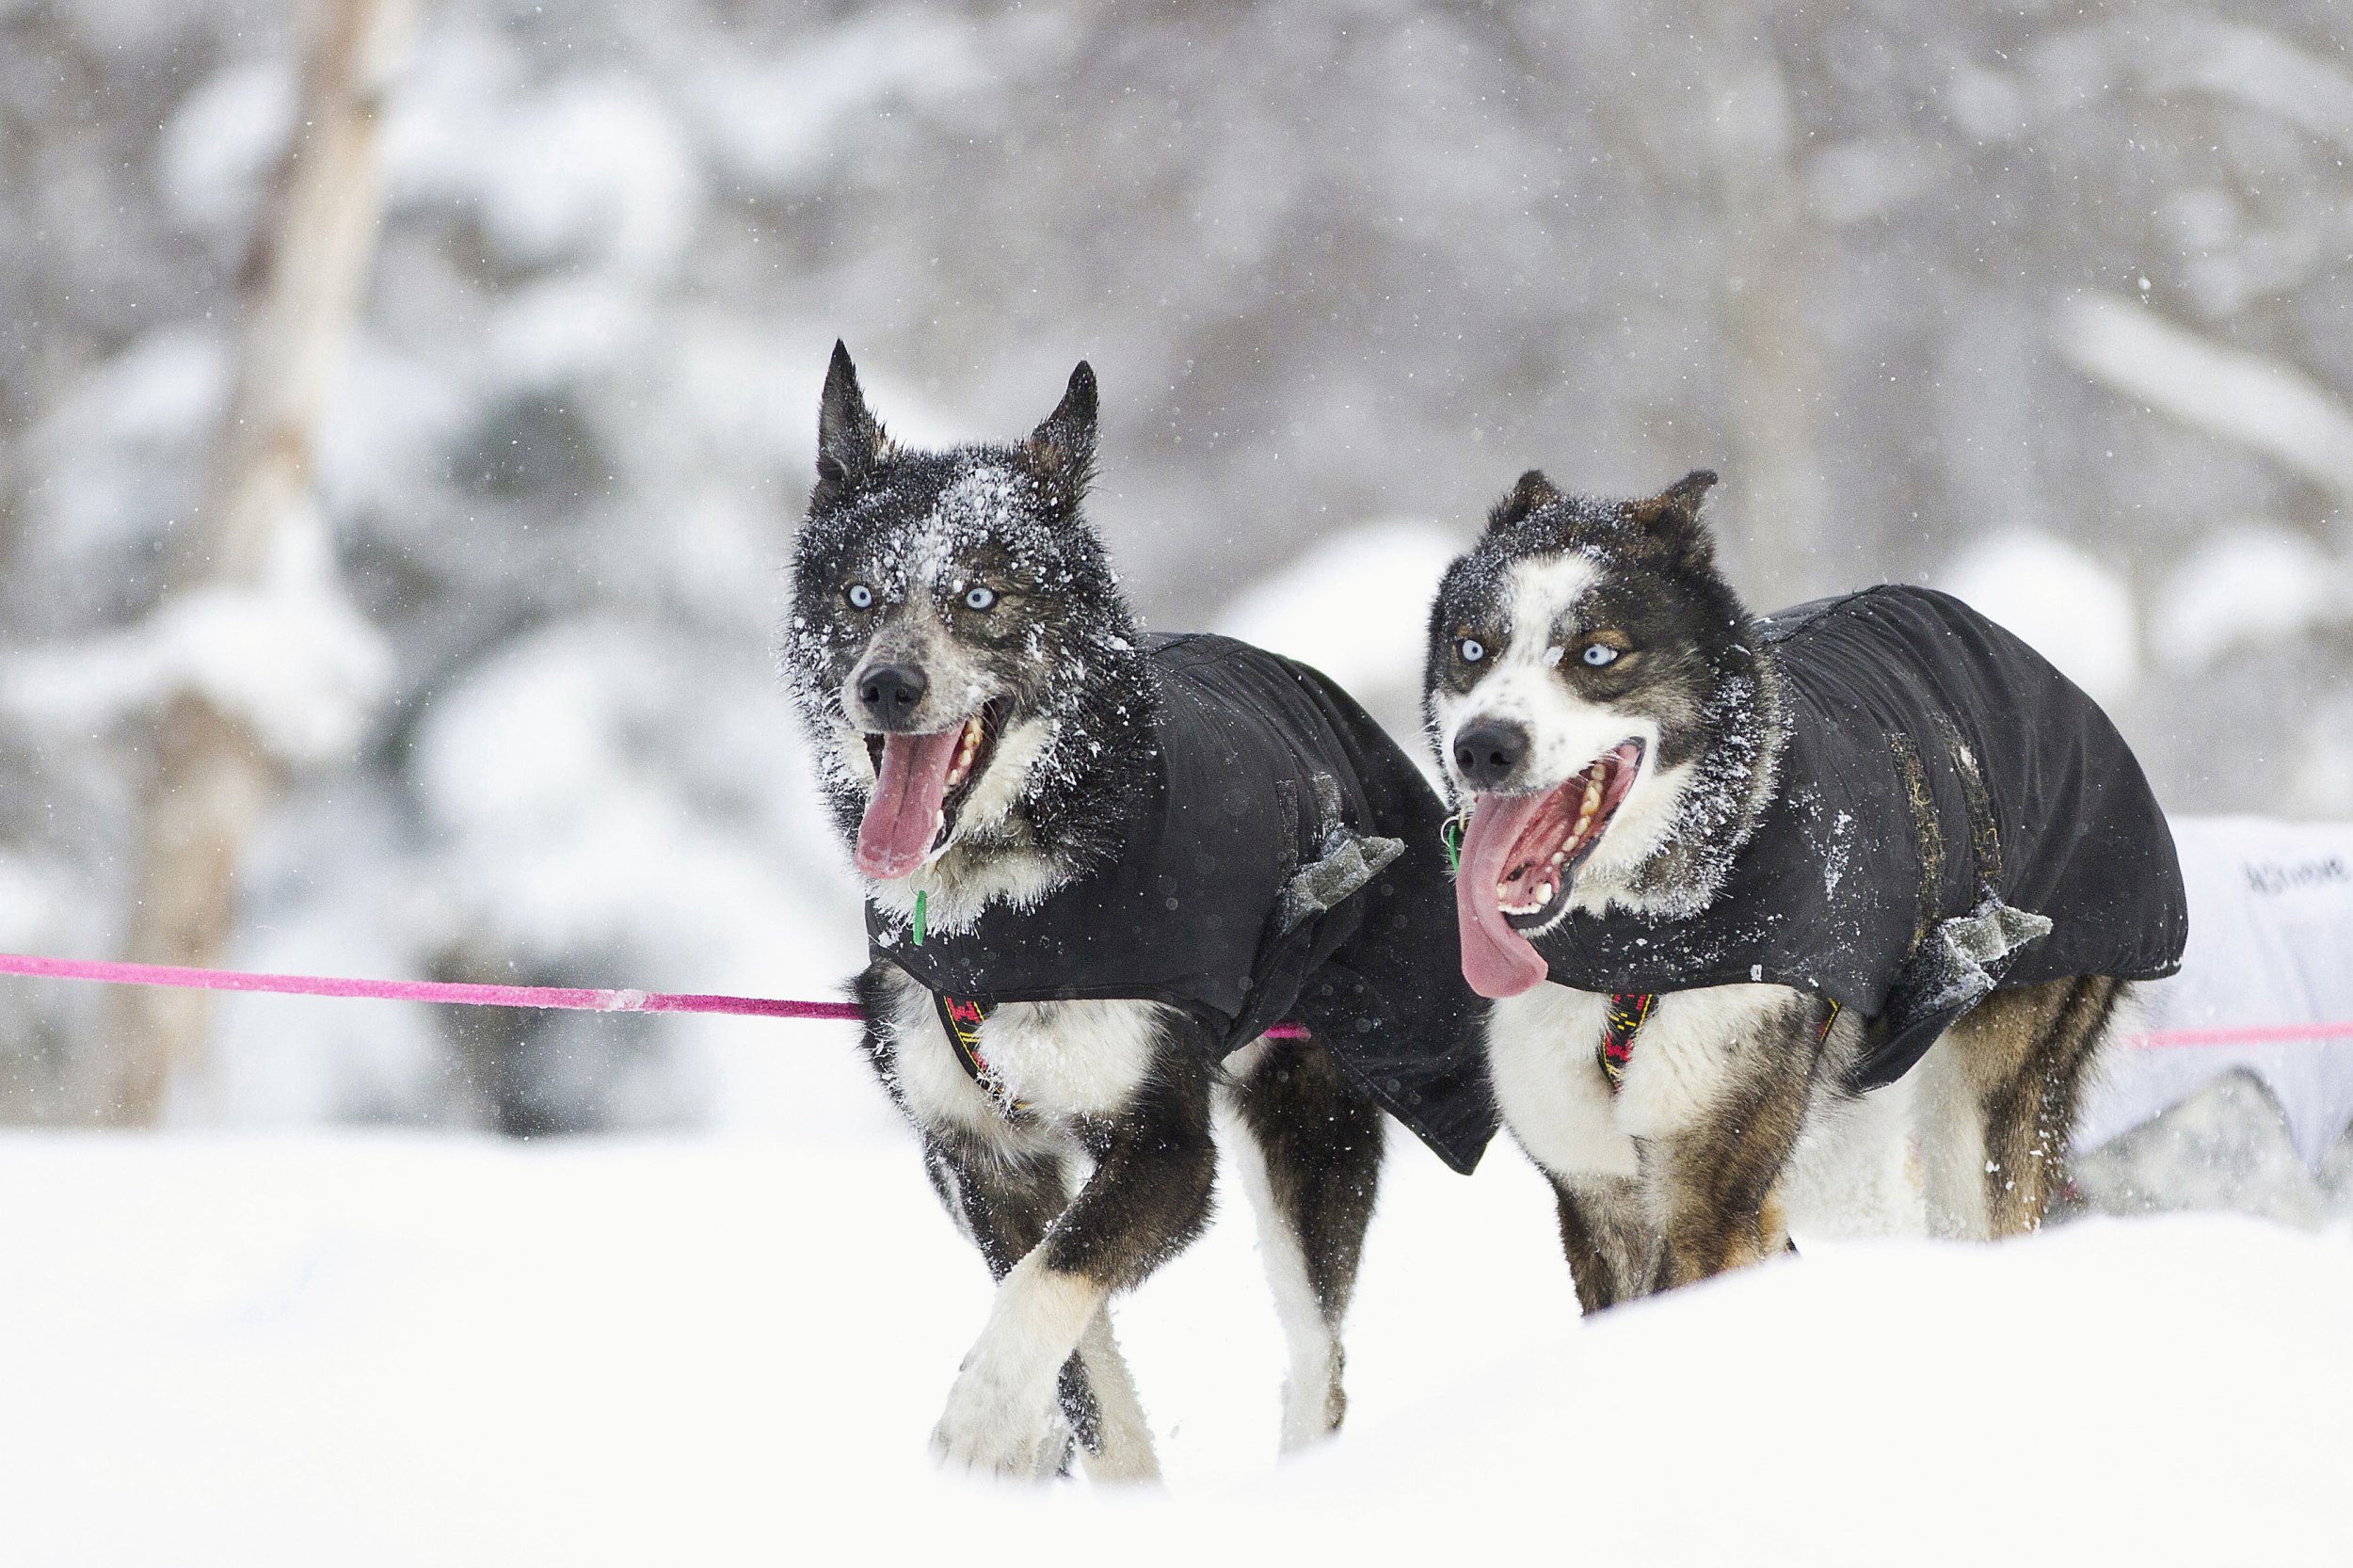 Two sled dogs belonging to Norweigan competitor Silvia Furtwangler at the 40th Iditarod